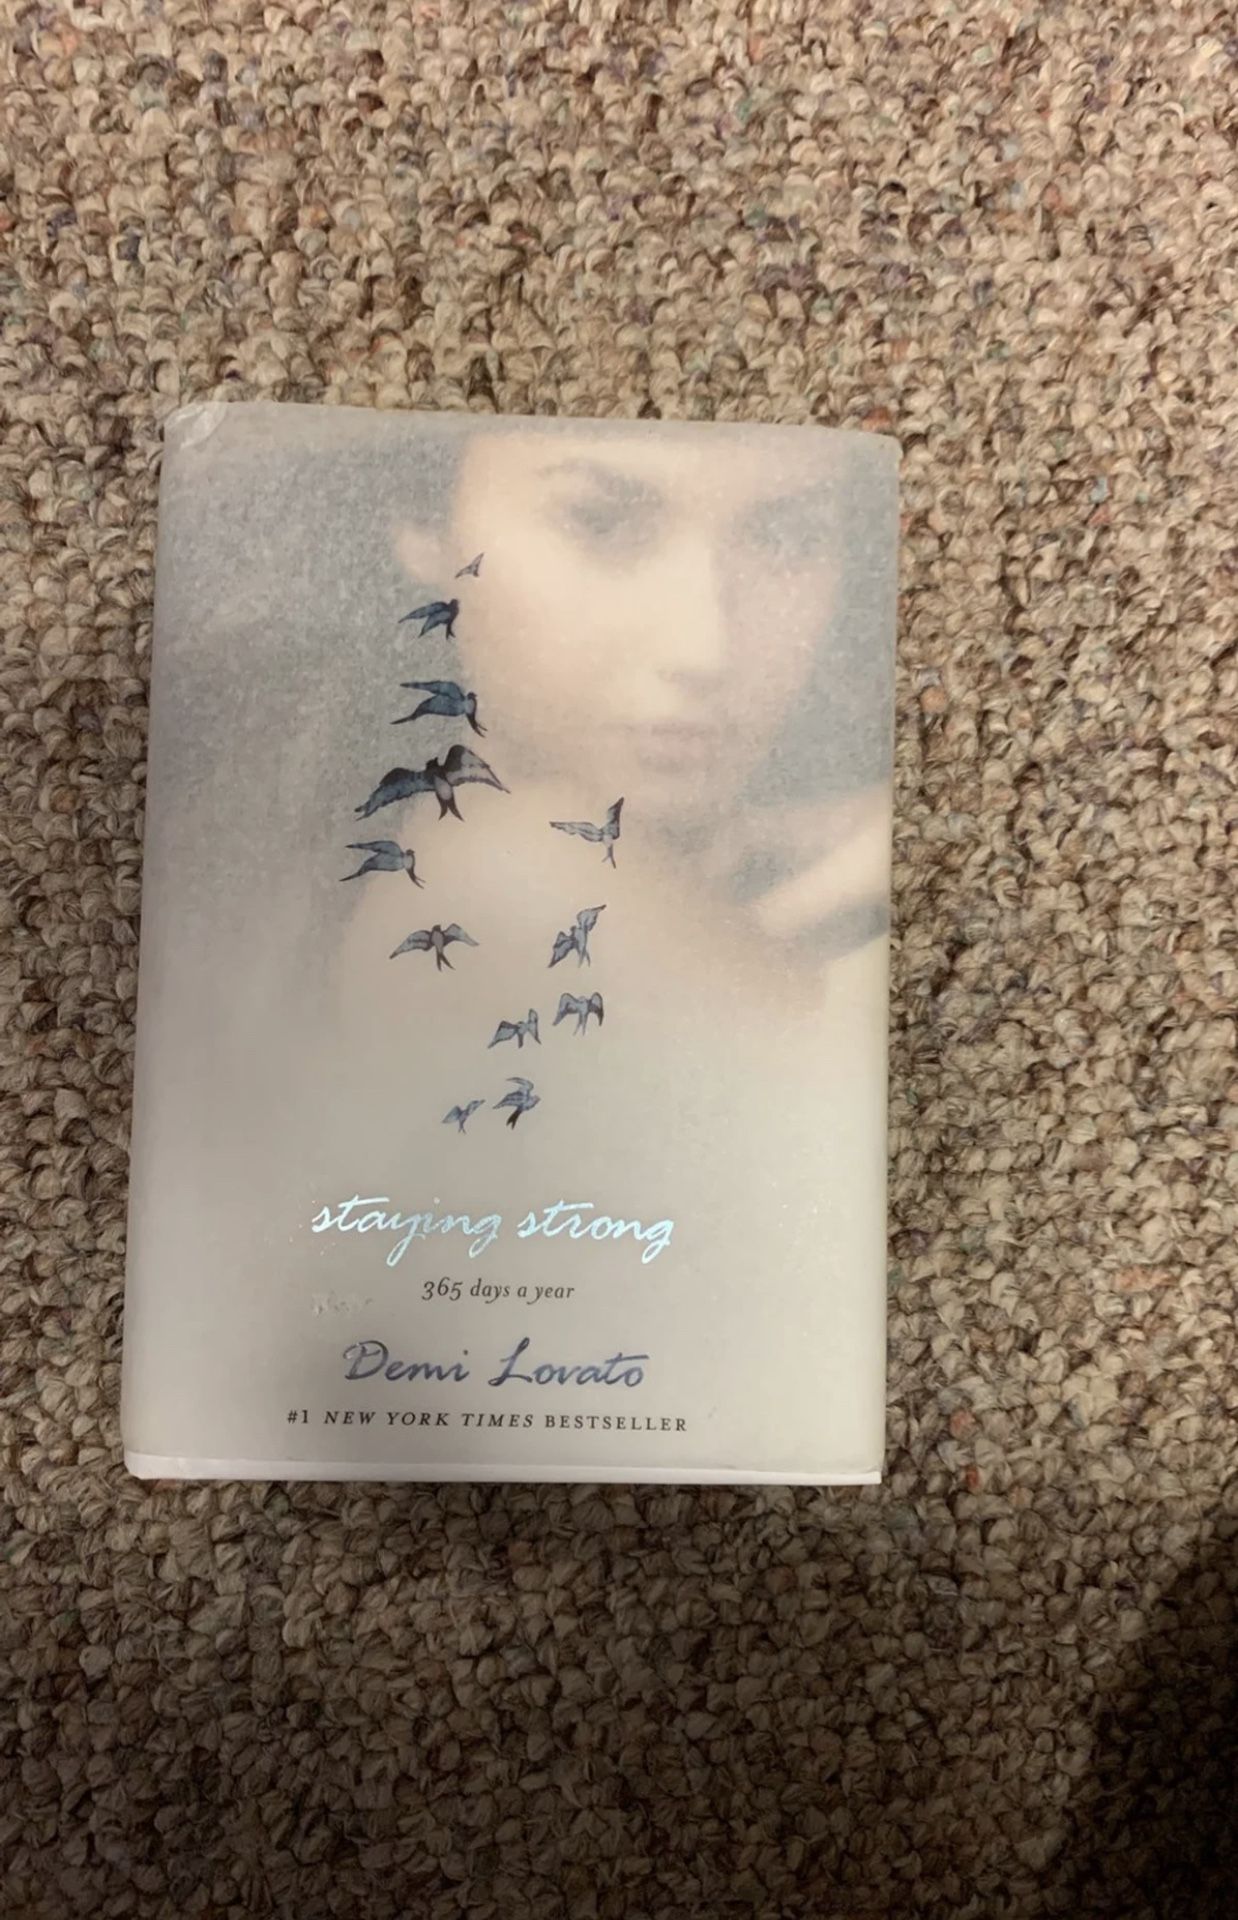 Demi Lovato’s Book: Staying Strong